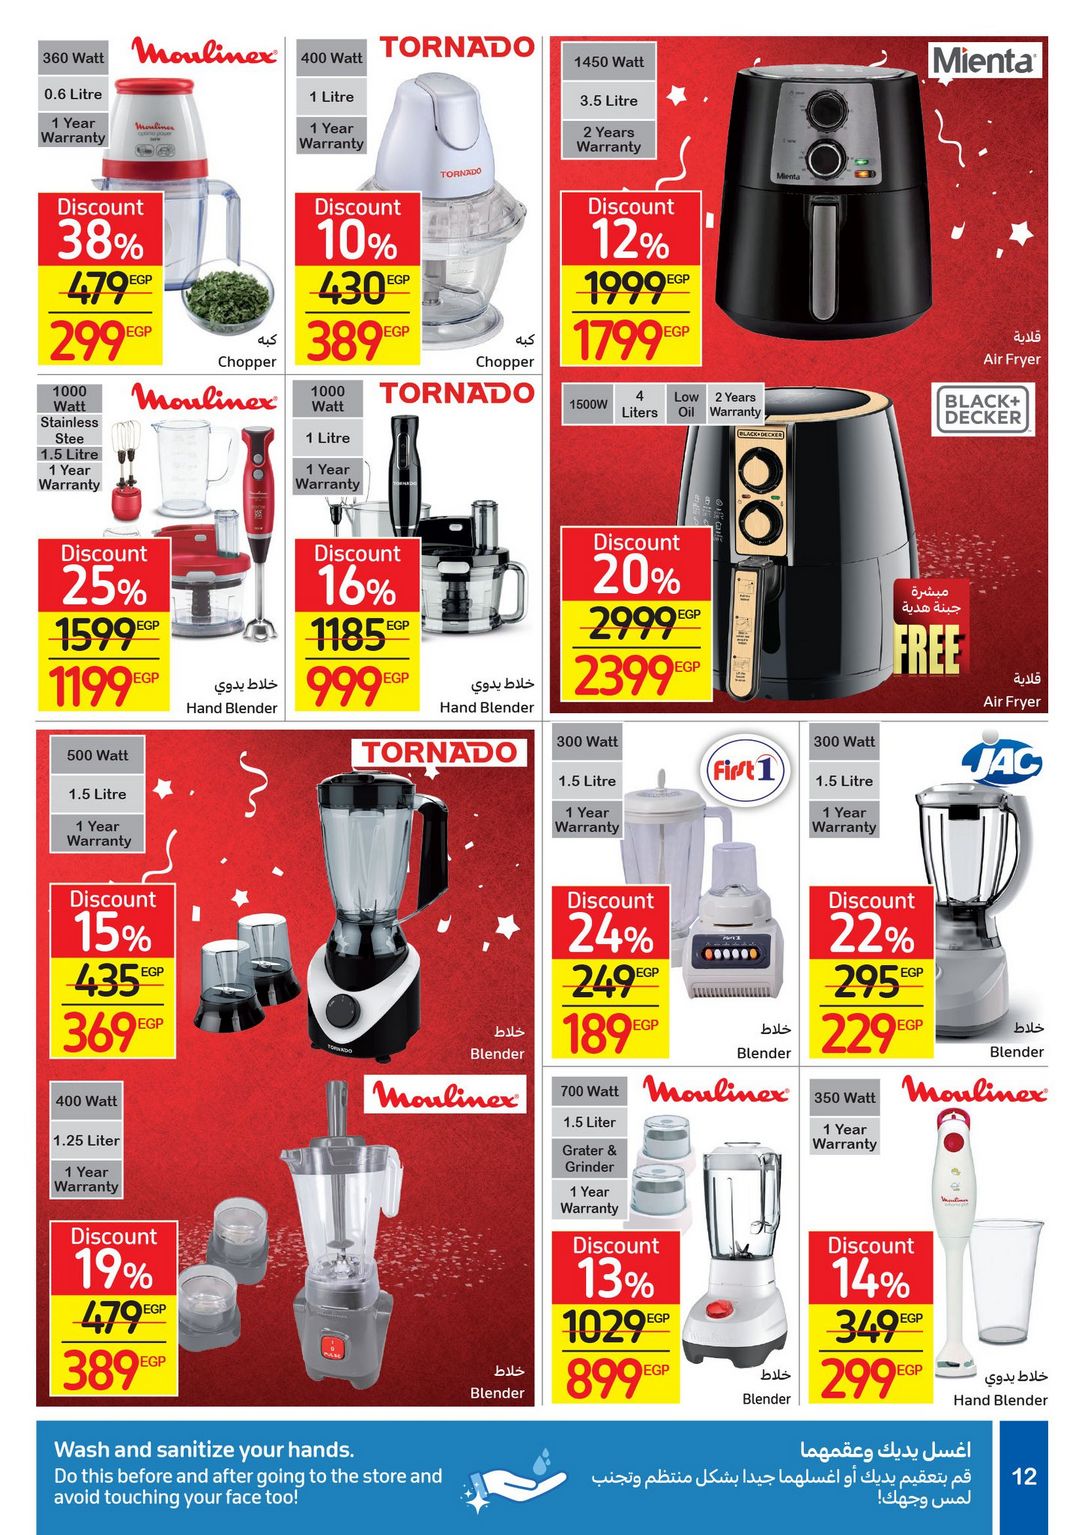 Carrefour Anniversary Offers till 18/2/2021 | Carrefour Egypt 14